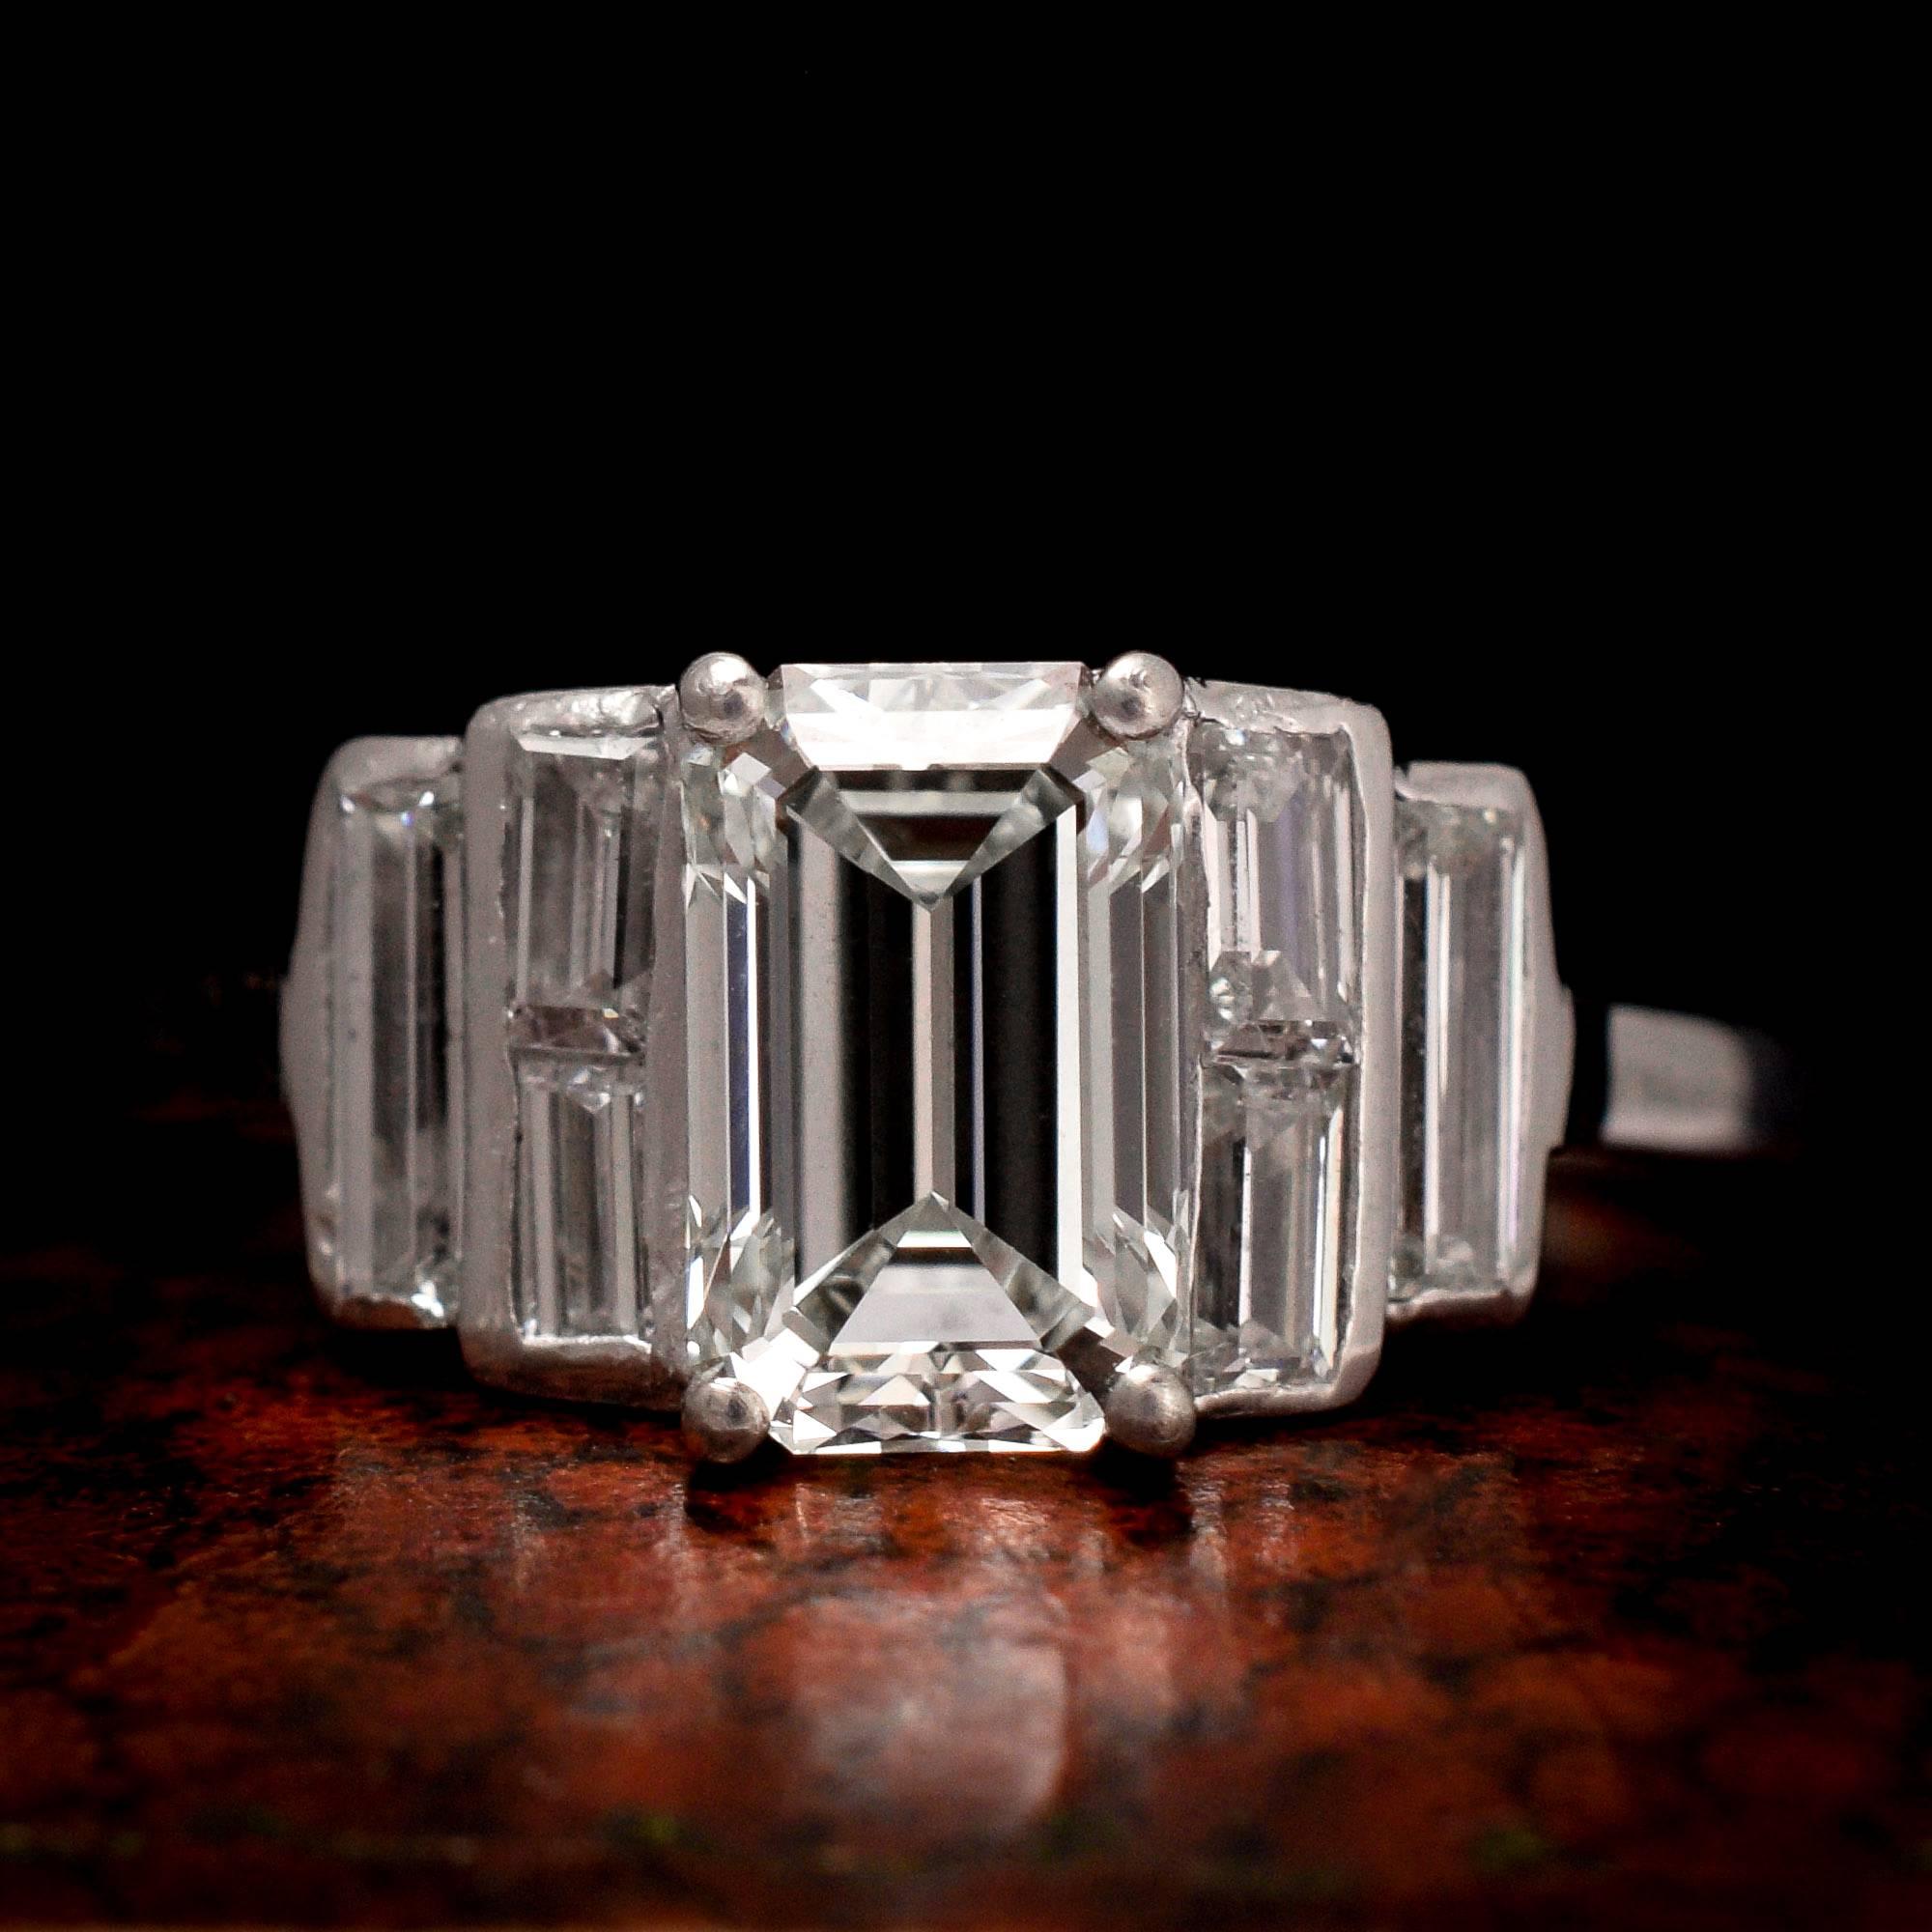 Art Deco, c.1925
An especially cool Art Deco engagement ring dating to c.1925, the main event being a 1.35 carat emerald cut diamond (with grading certificate stating K-VS1). The stepped shoulders are set with further baguette cut diamonds; the